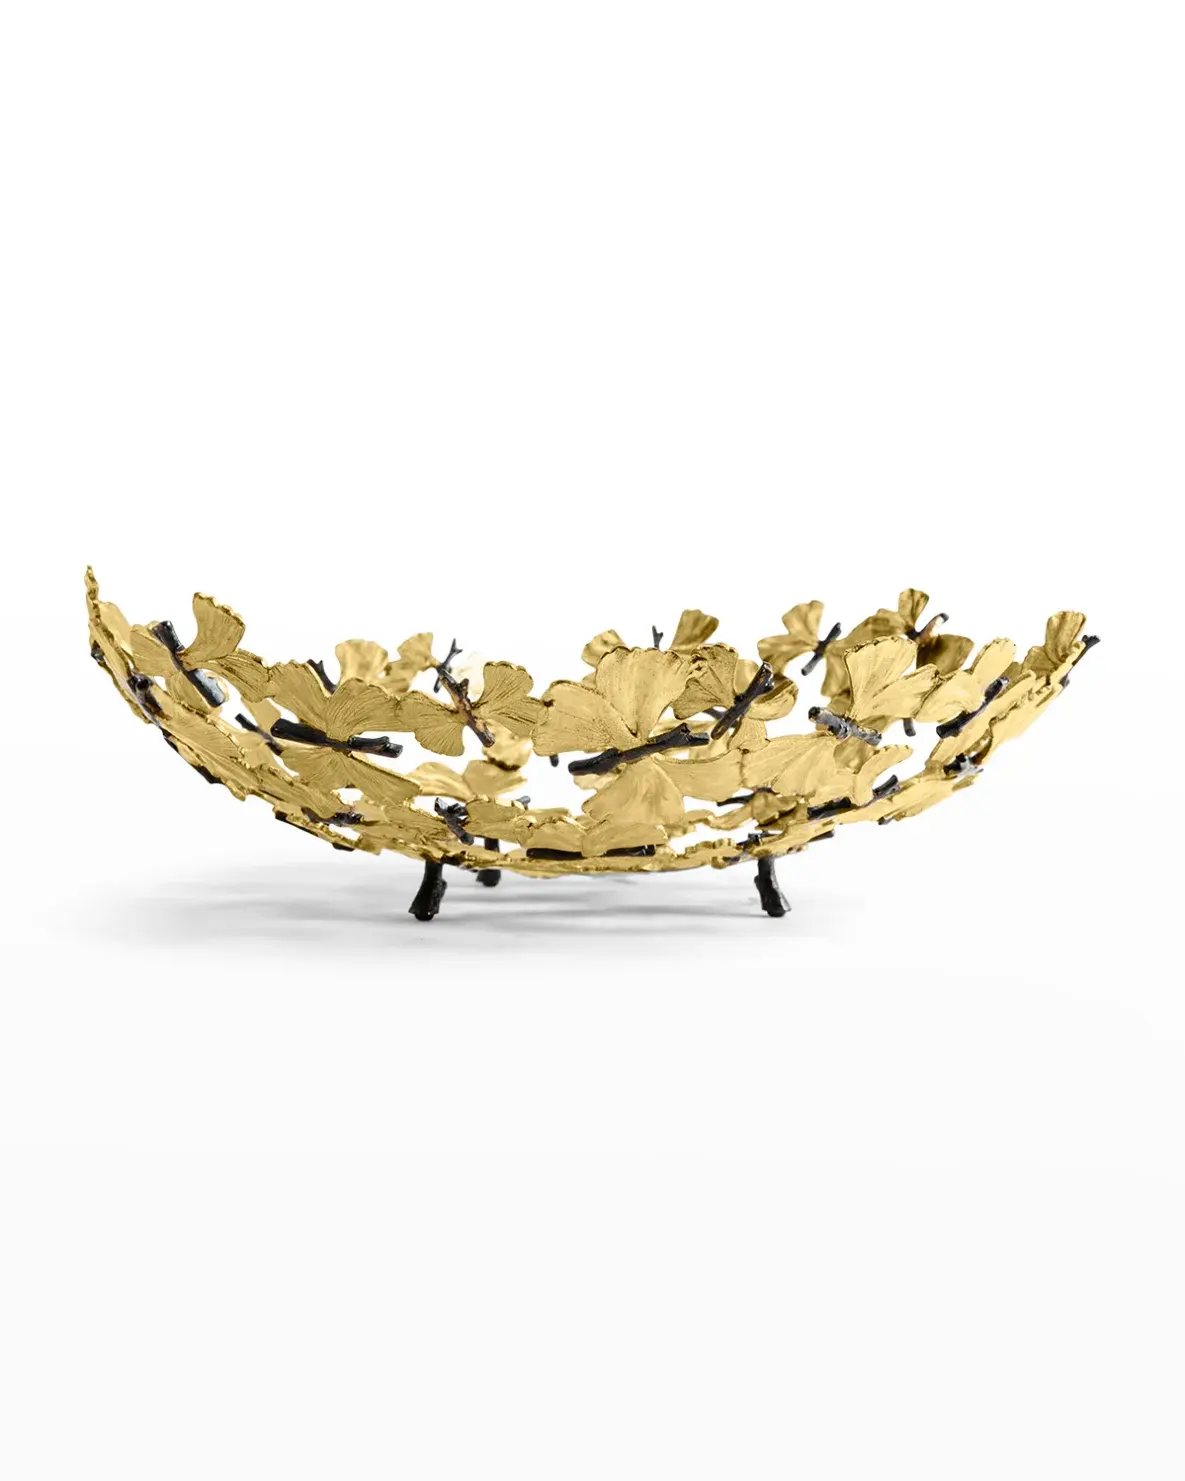 Golden Finished Customized Design Bowl With Stand Hotels Dinnerware Salad Serving Bowl New Irregular Shape Fruits Bow